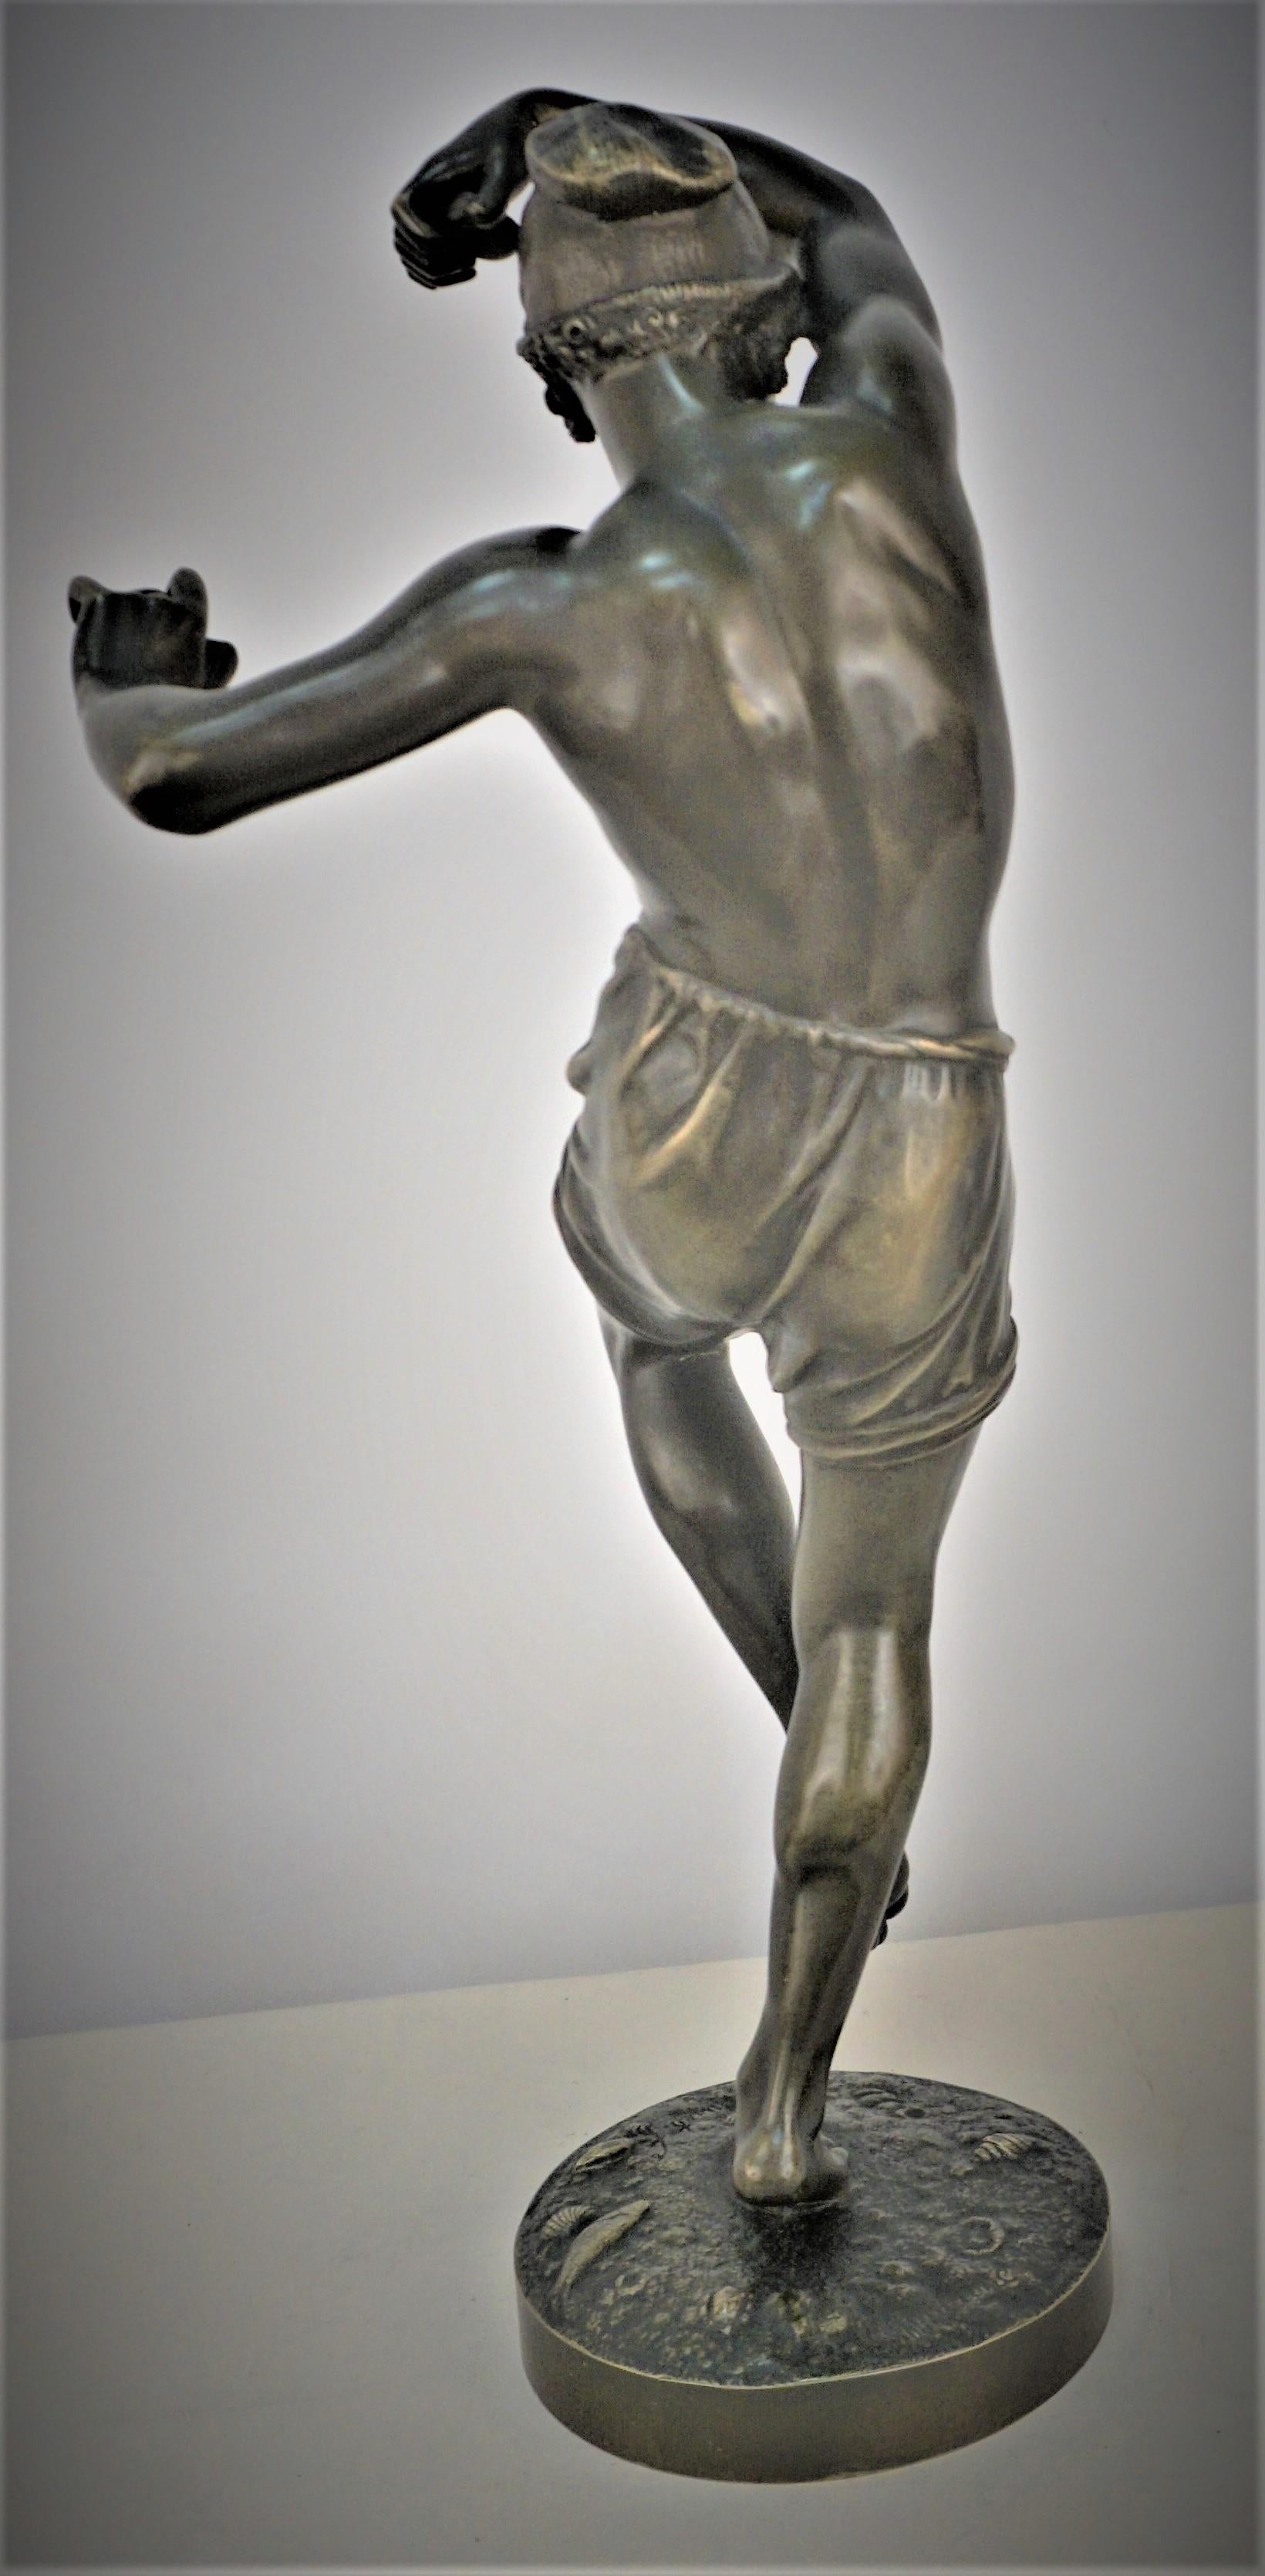 19th Century French Bronze Figure of a Neapolitan Dancer with Castanets